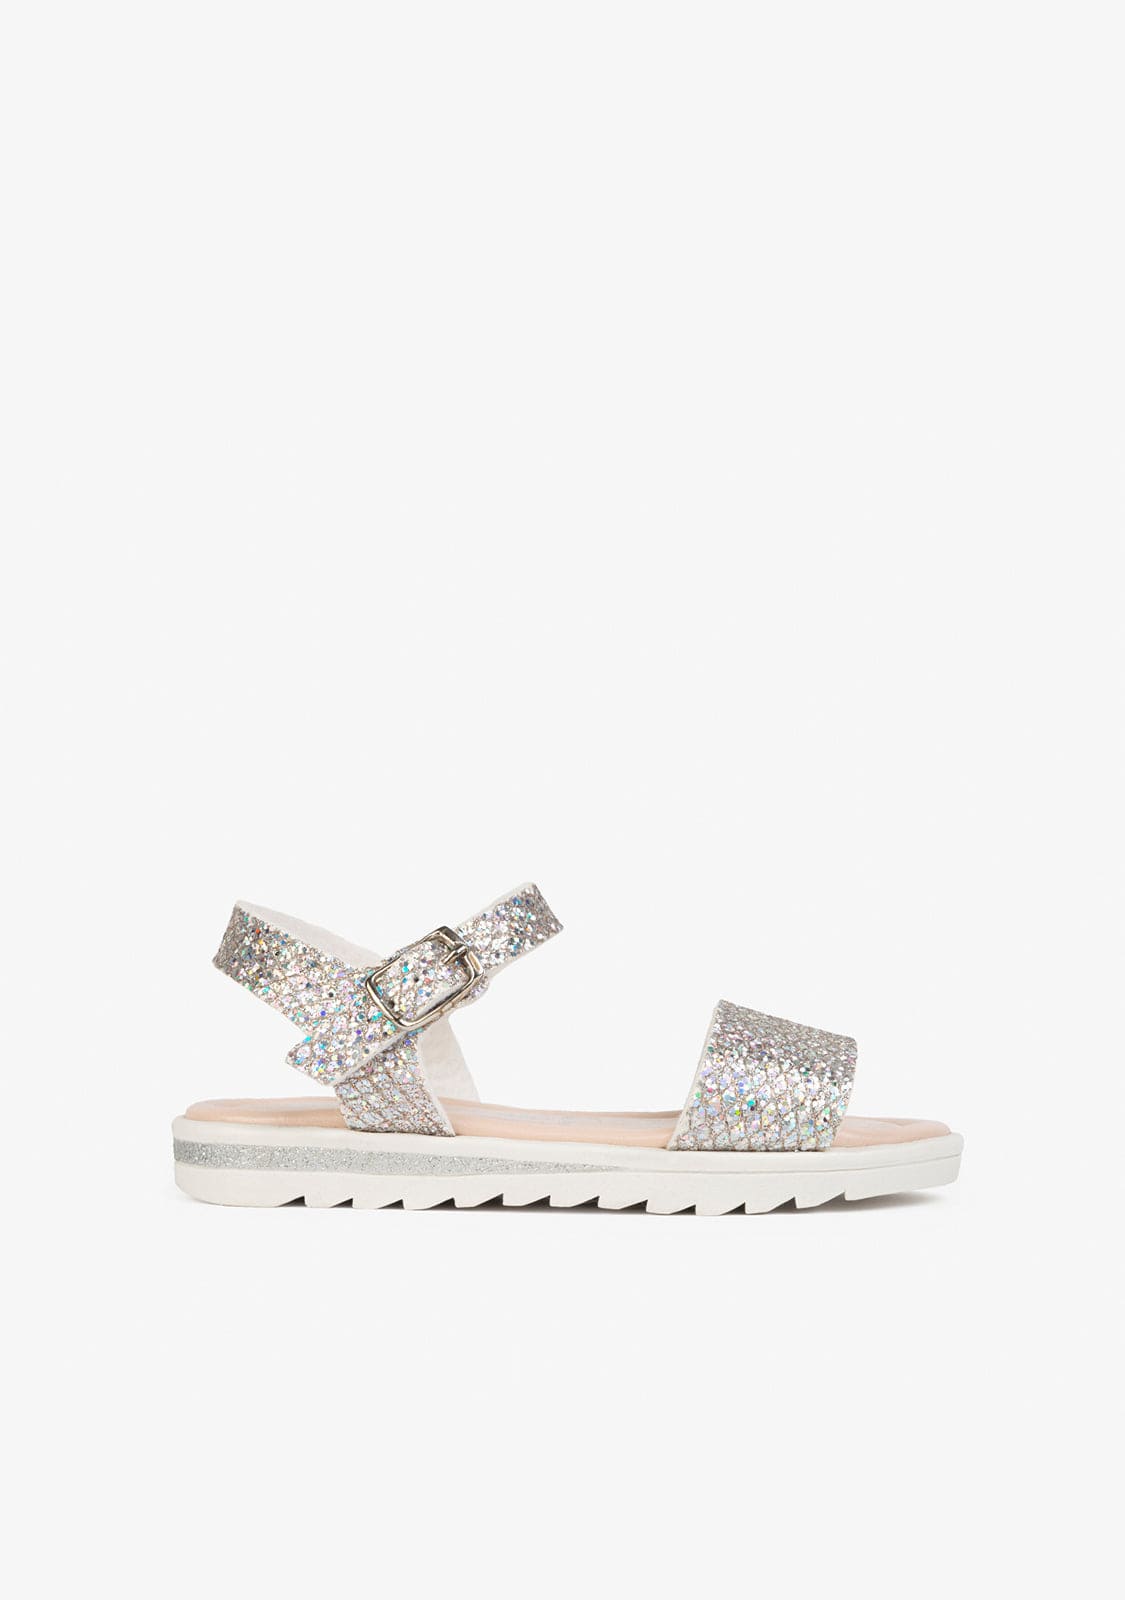 CONGUITOS Shoes Girl's Glitter Multi-Silver Sandals